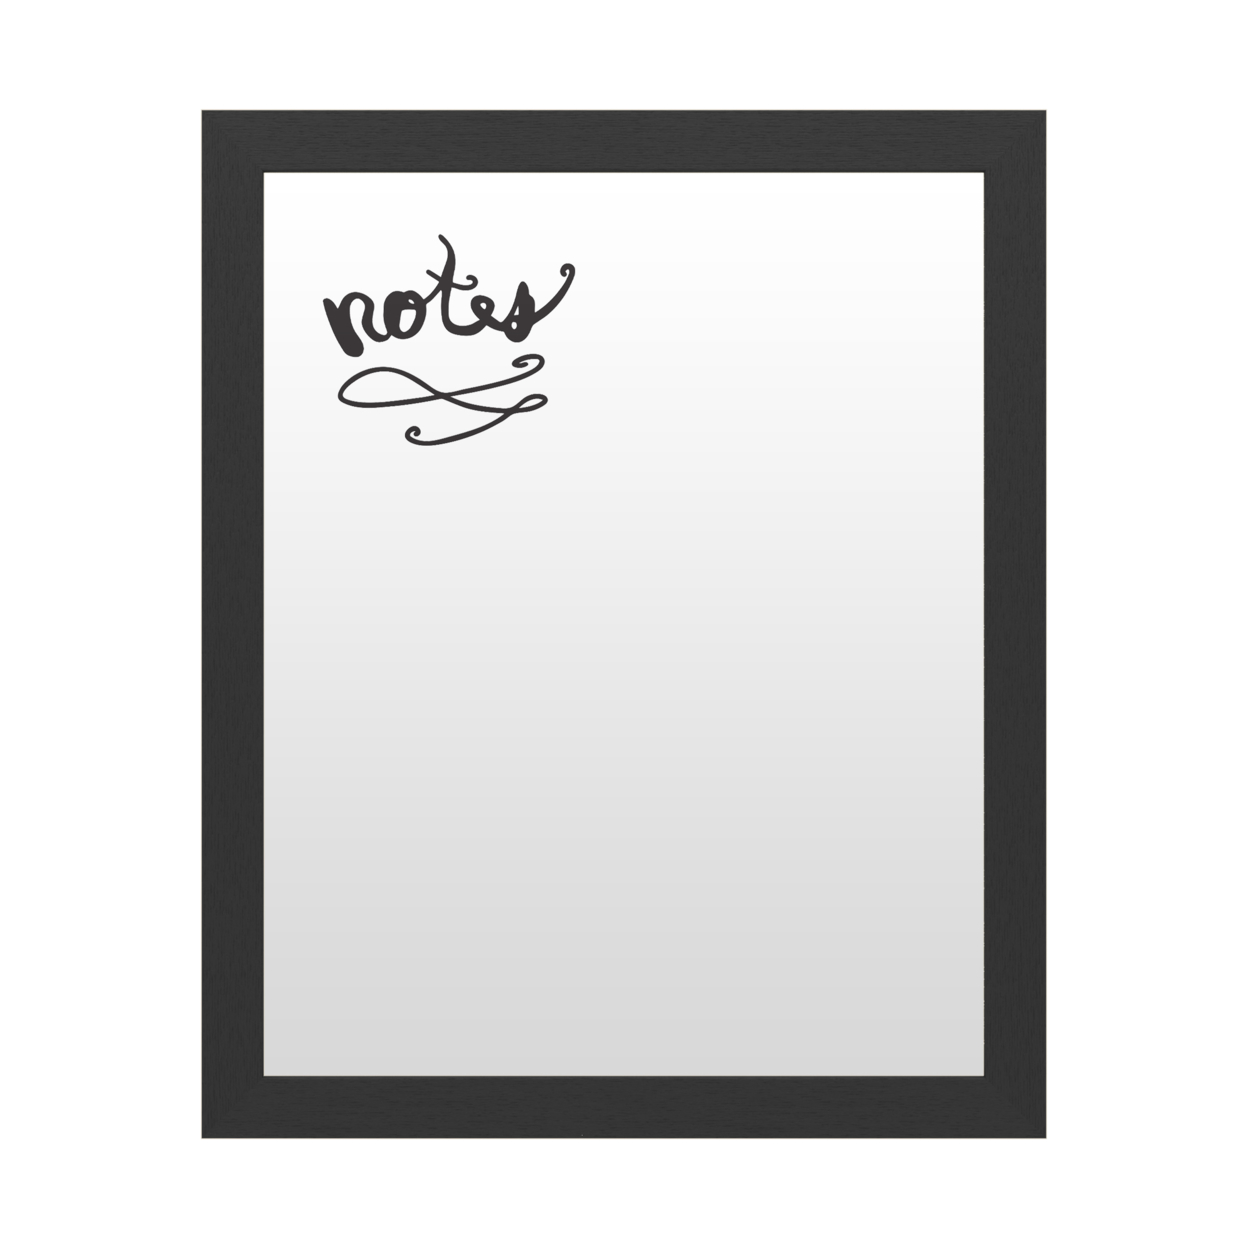 Dry Erase 16 X 20 Marker Board With Printed Artwork - Notes Script White Board - Ready To Hang